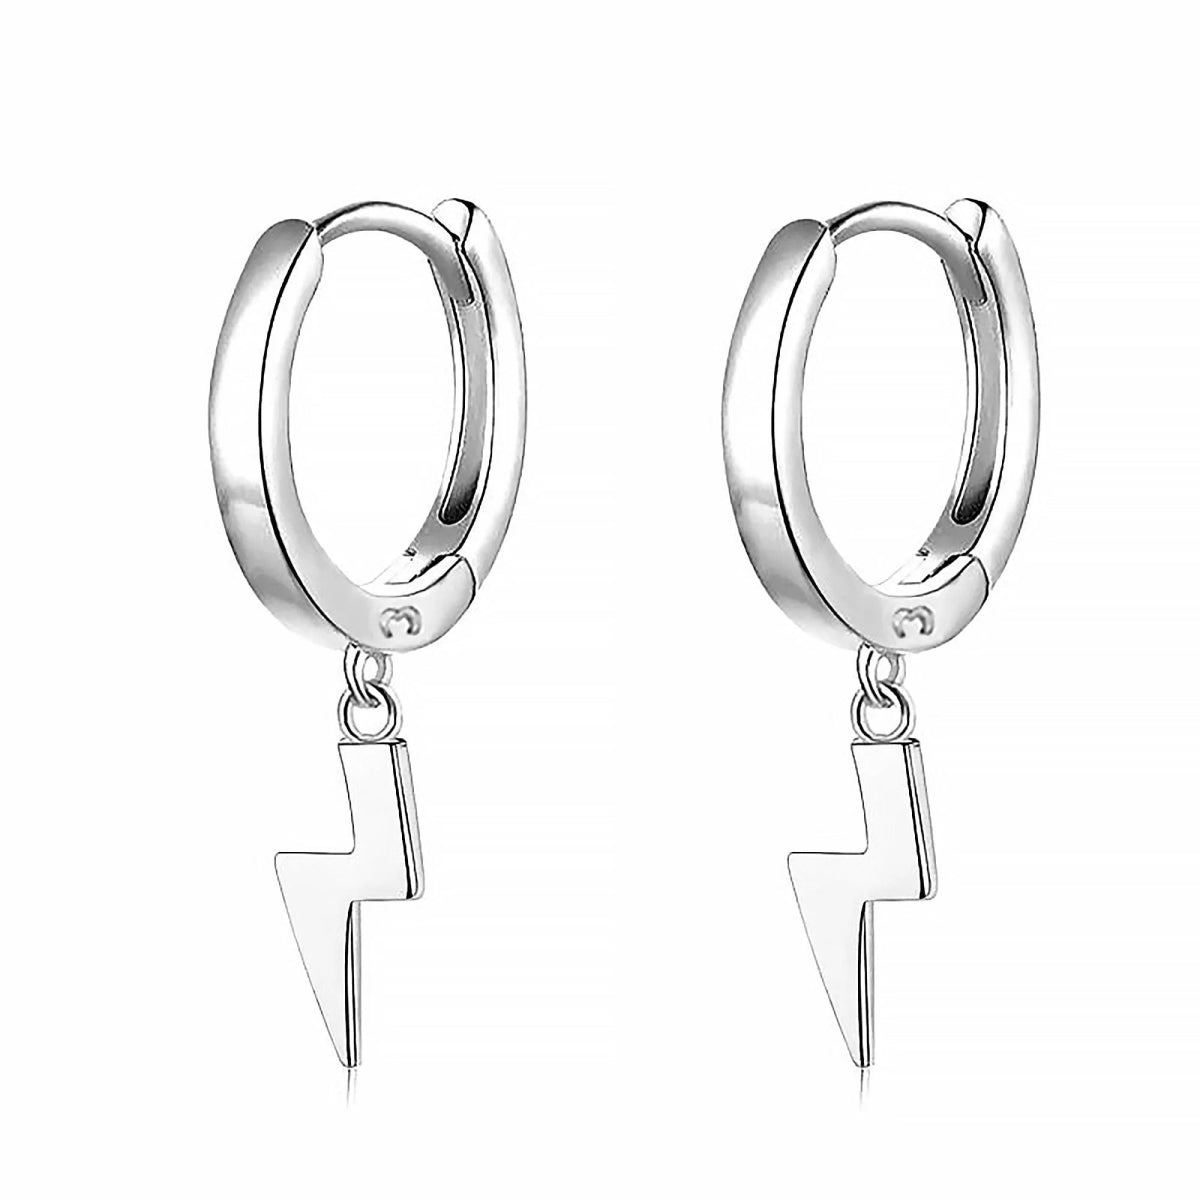 12 x 2mm 925 sterling silver hoop earrings for men – Sharon SaintDon Silver  and Gold Handmade Jewelry